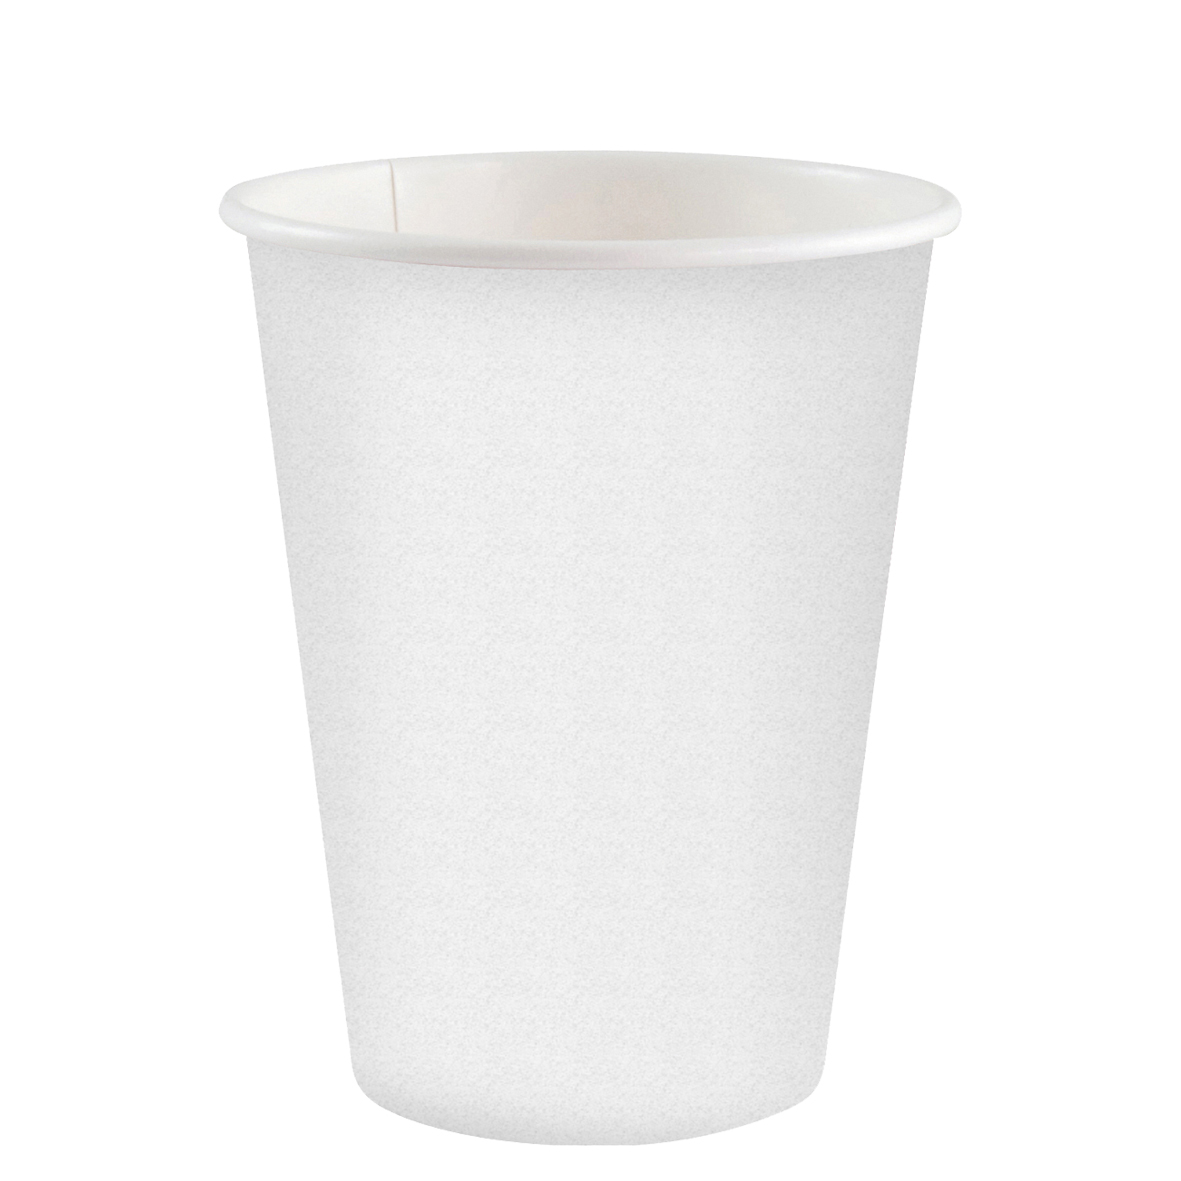 SW Hot Paper Cup White*, 12 oz.